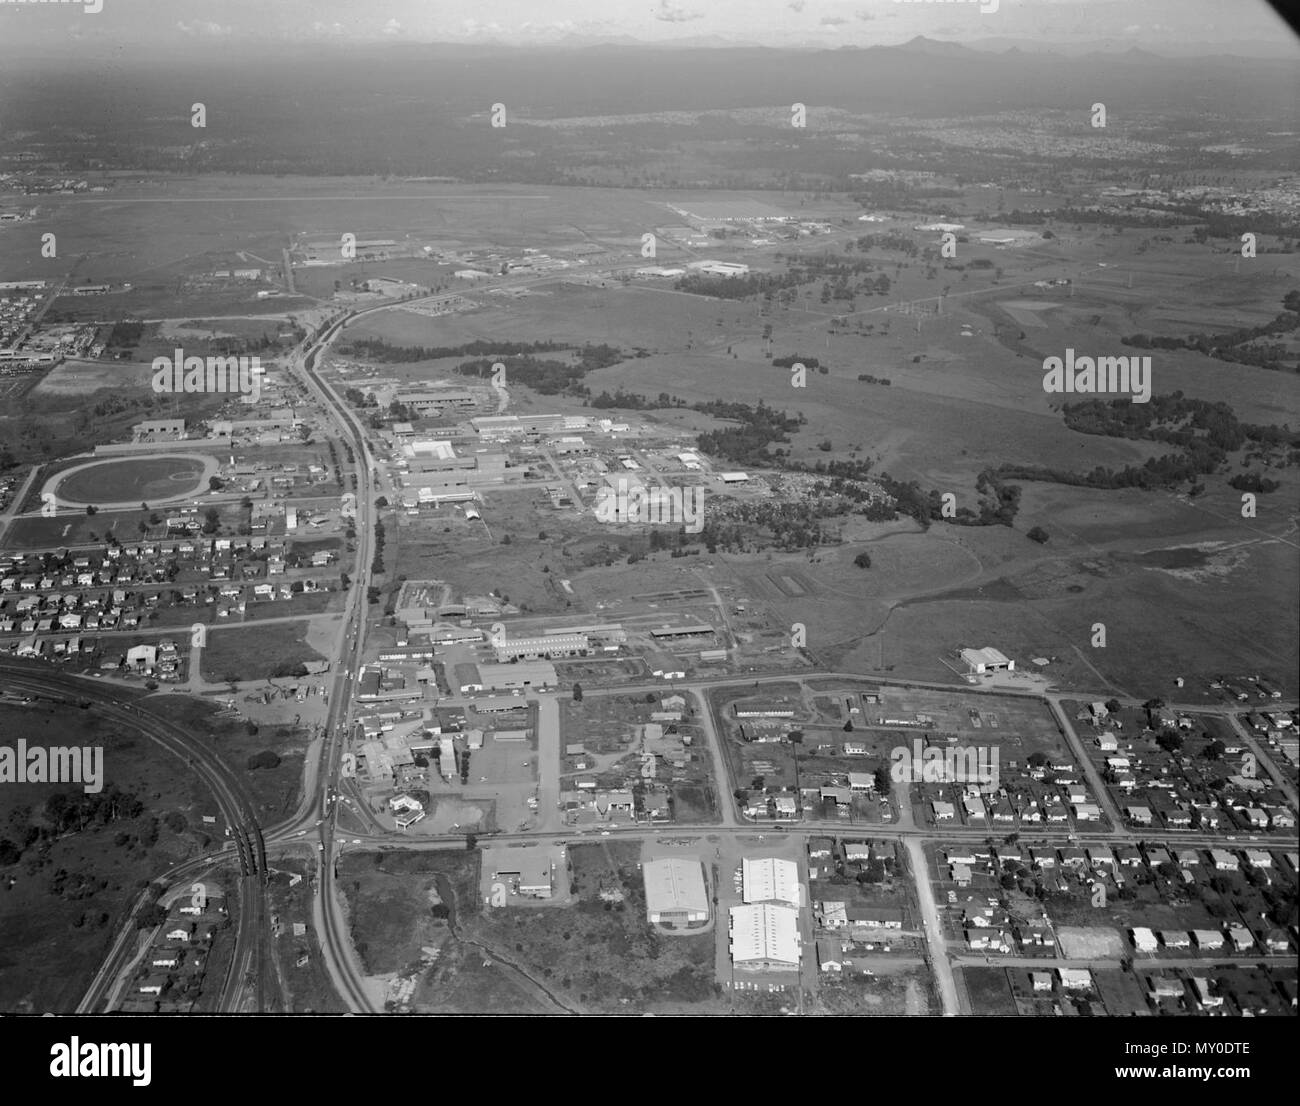 Rocklea from the air, Brisbane, 1967. The industrial suburb of Rocklea in southern Brisbane. ON the left is Rocklea Showgrounds. The road snaking into the distance is Ipswich Road, before it became the Ipswich Motorway. Stock Photo